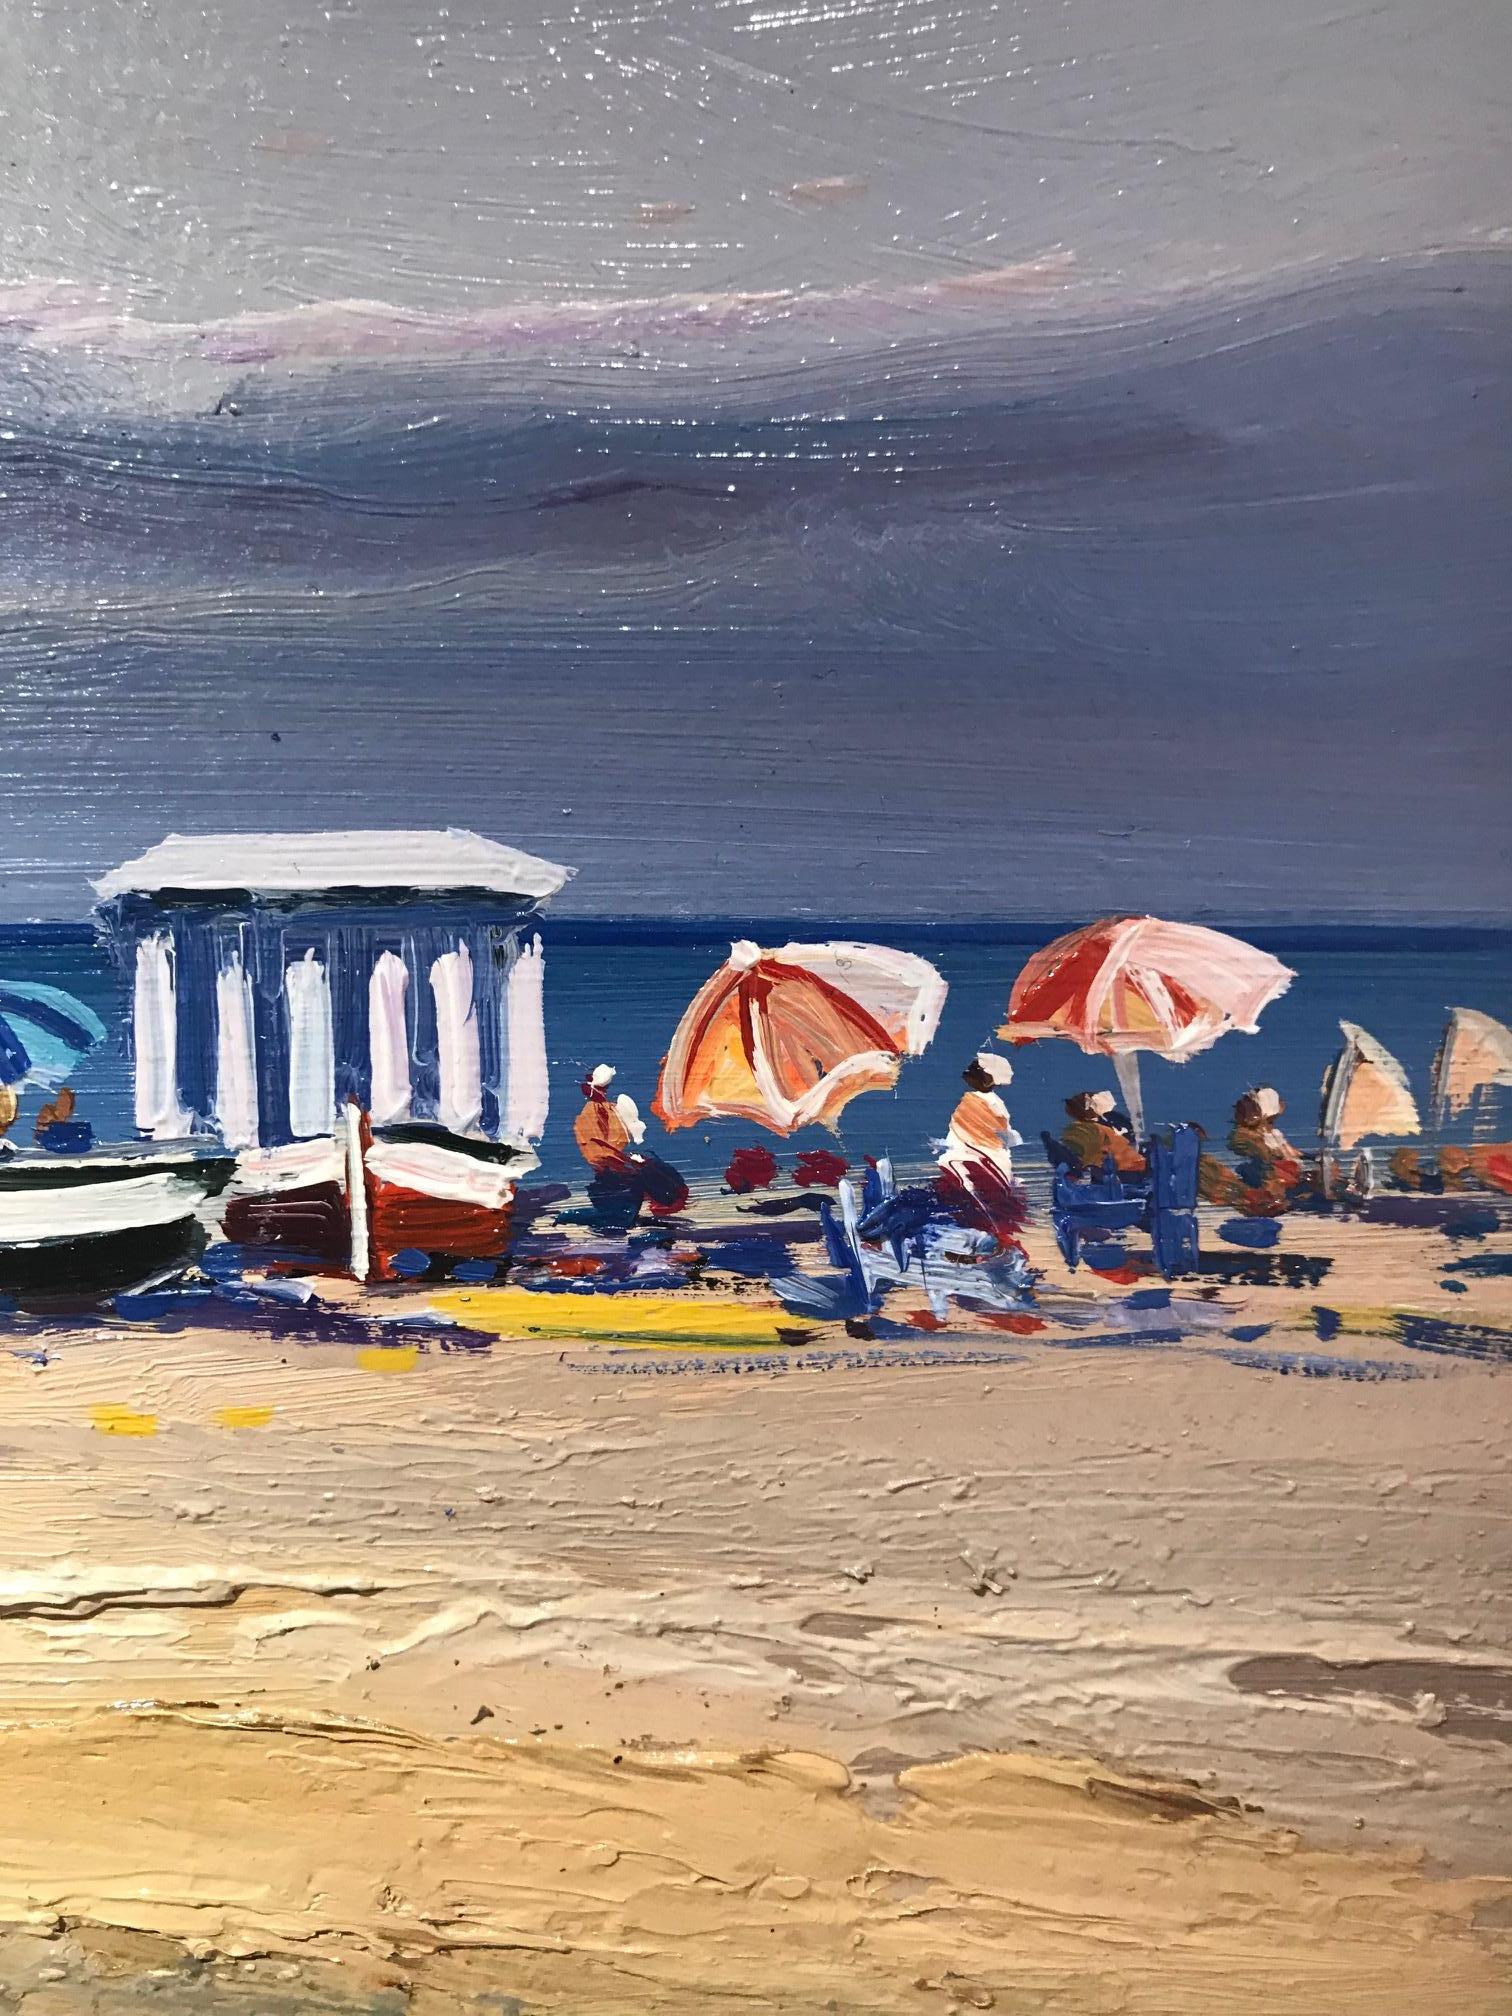 A warm and beautiful contemporary beach scene 'Beach Day' by E. Martinez. This stunning seascape has a soft and natural colour palette, pale blues and earthy cool tones are subtle and mellow. Interesting textures create a warm and balanced